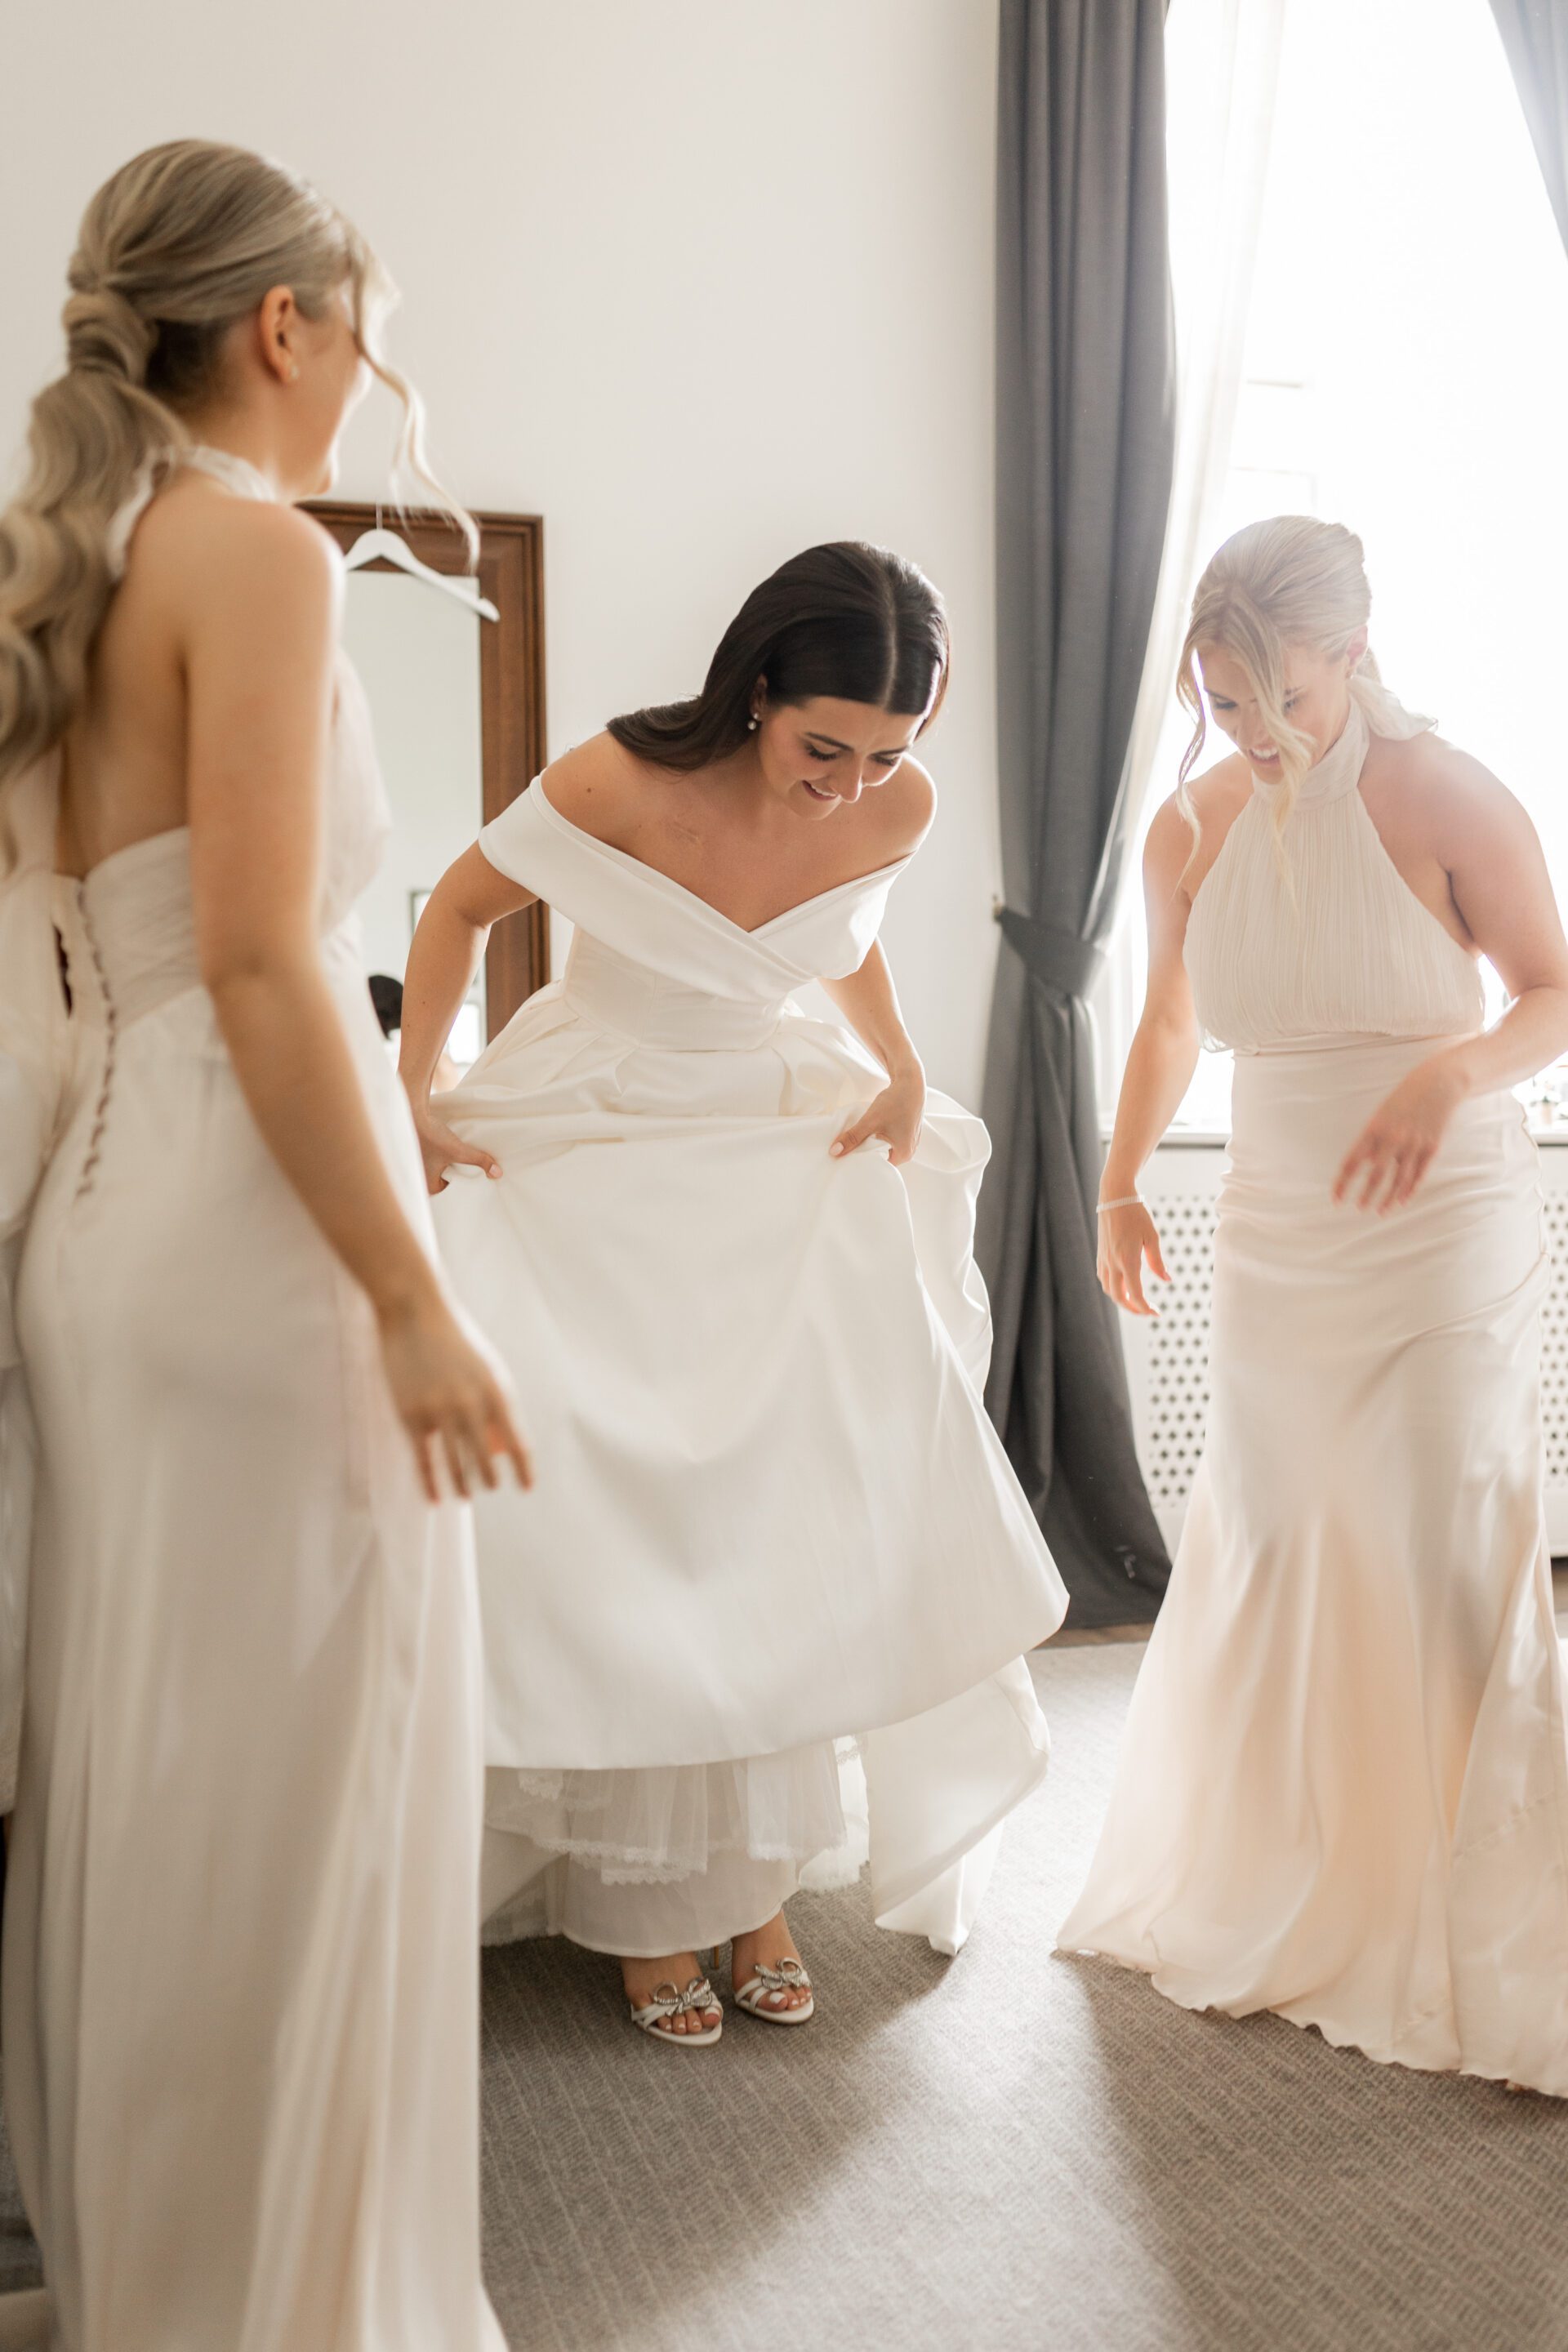 The bridal party help the bride get ready for her wedding at Tortworth Court